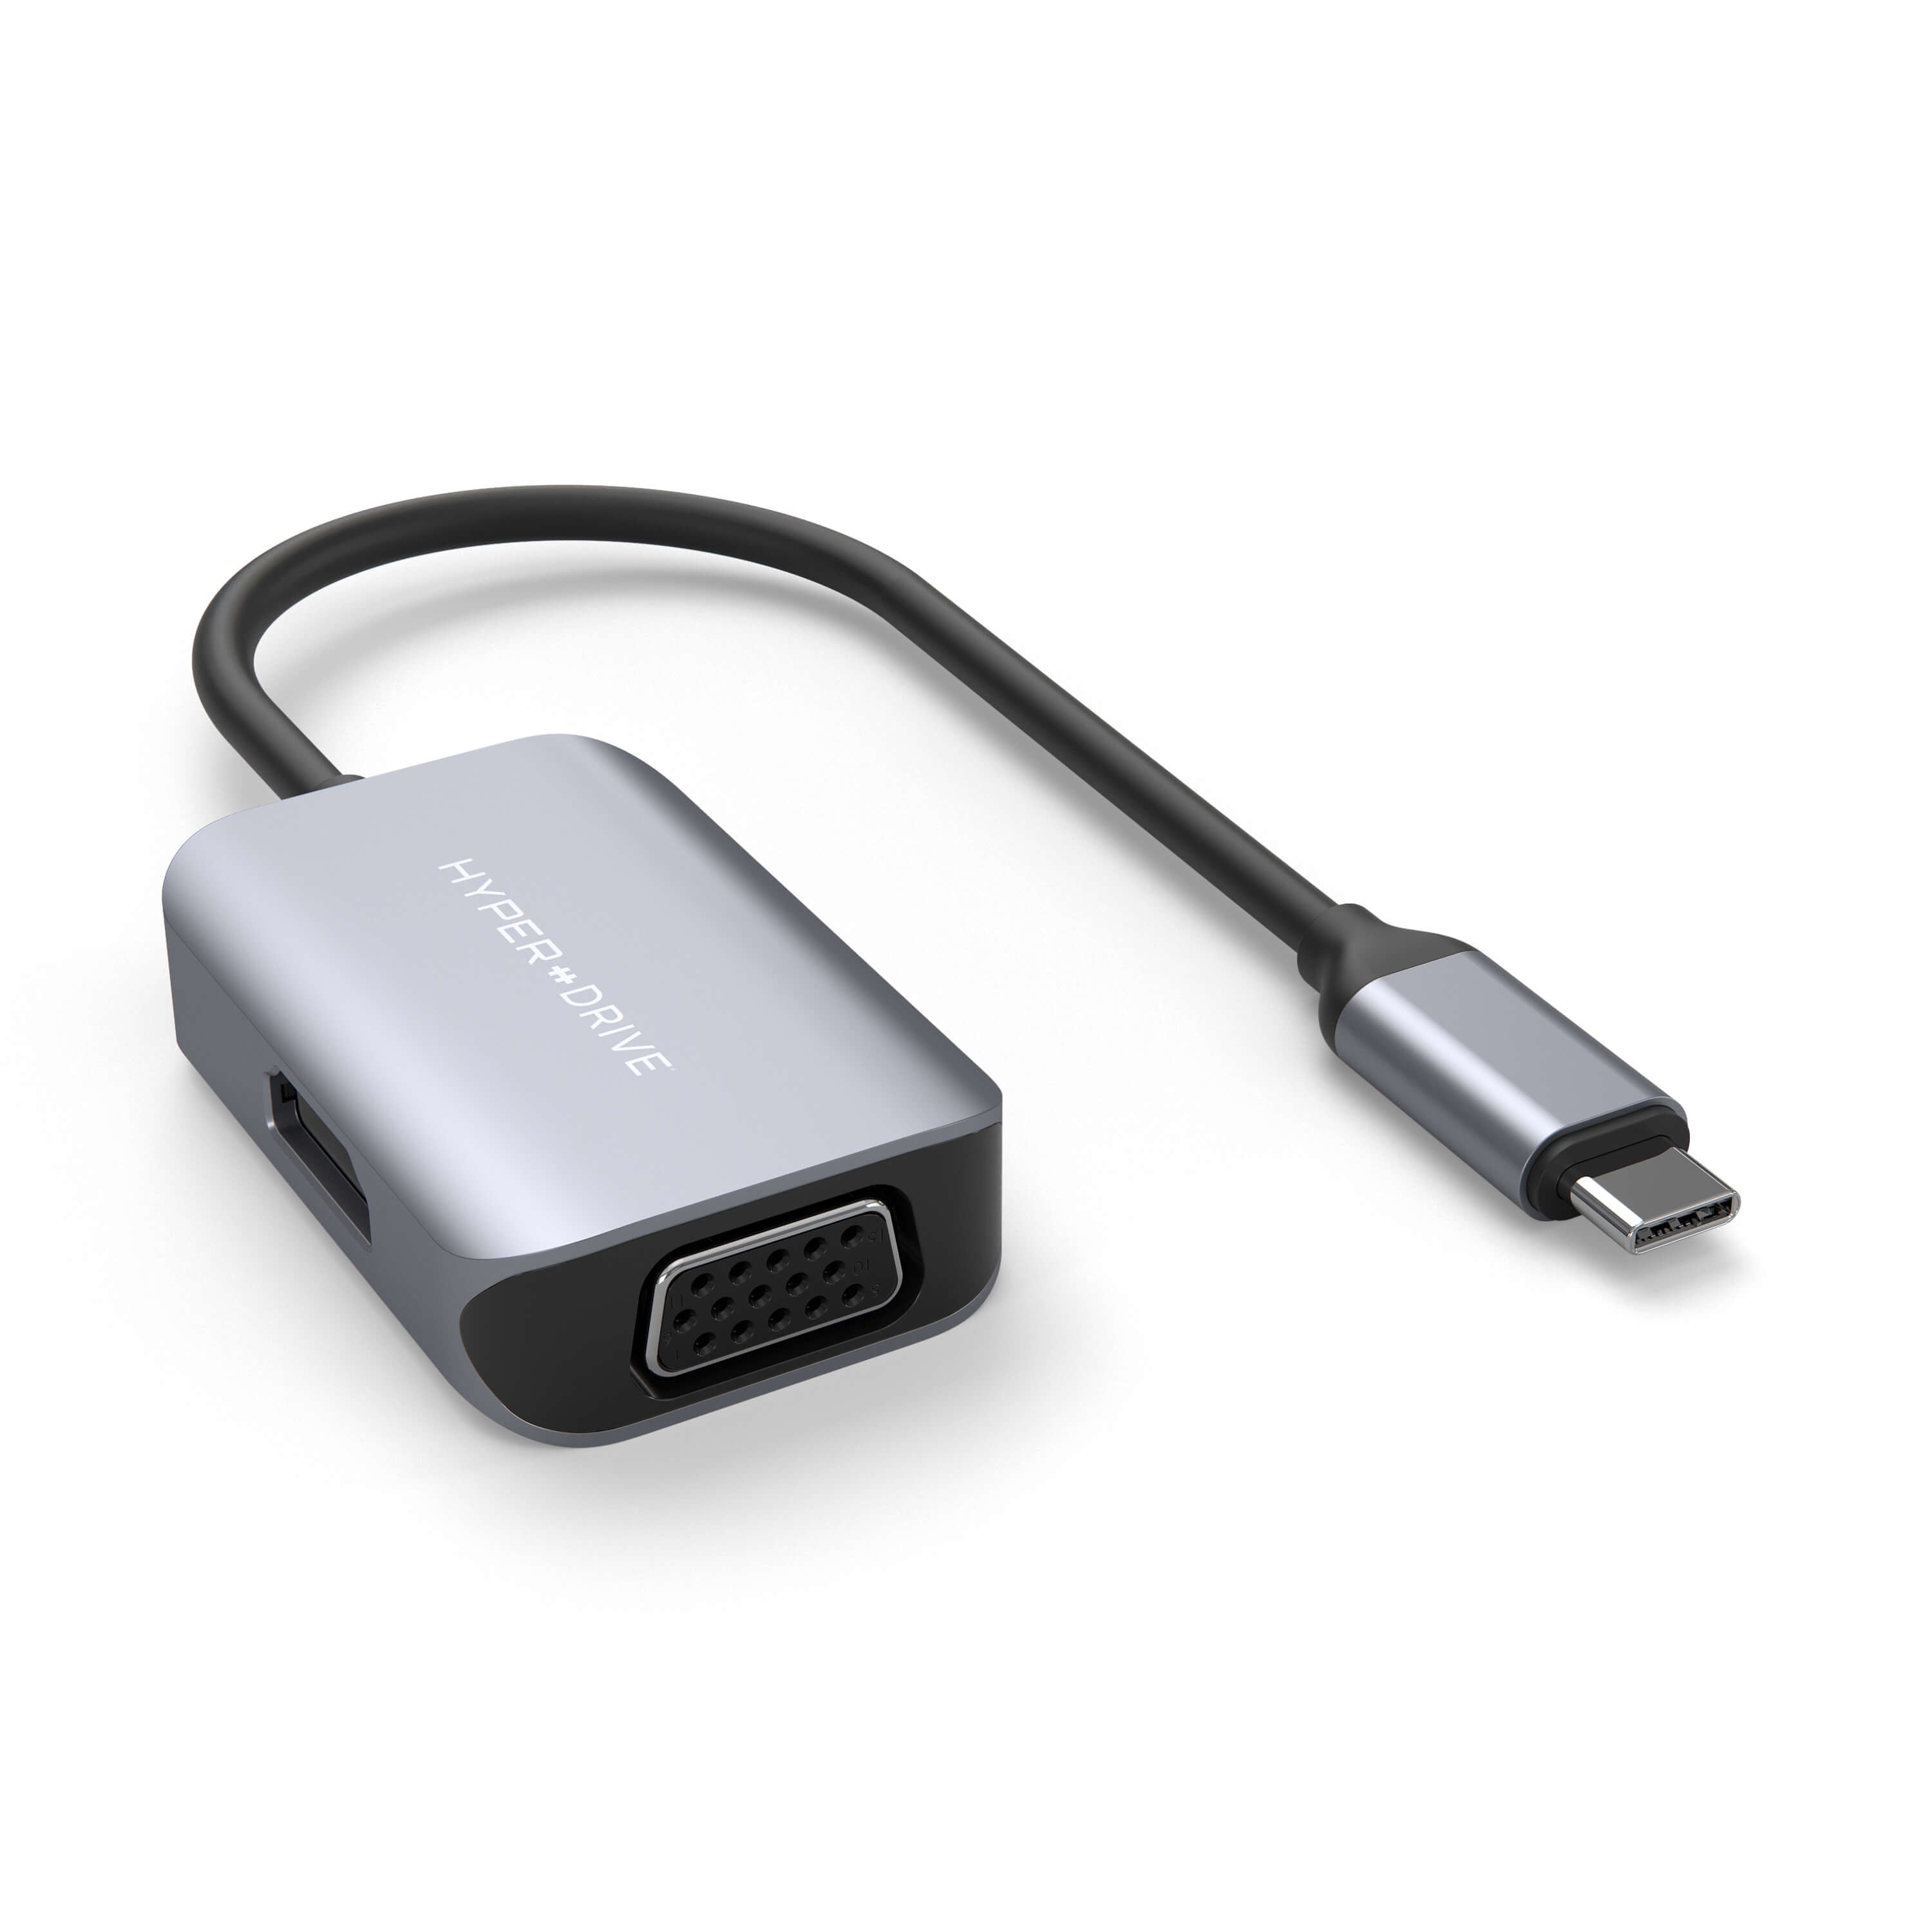 Mariner server servitrice HyperDrive USB-C to HDMI and VGA Video Adapter – HyperShop.com